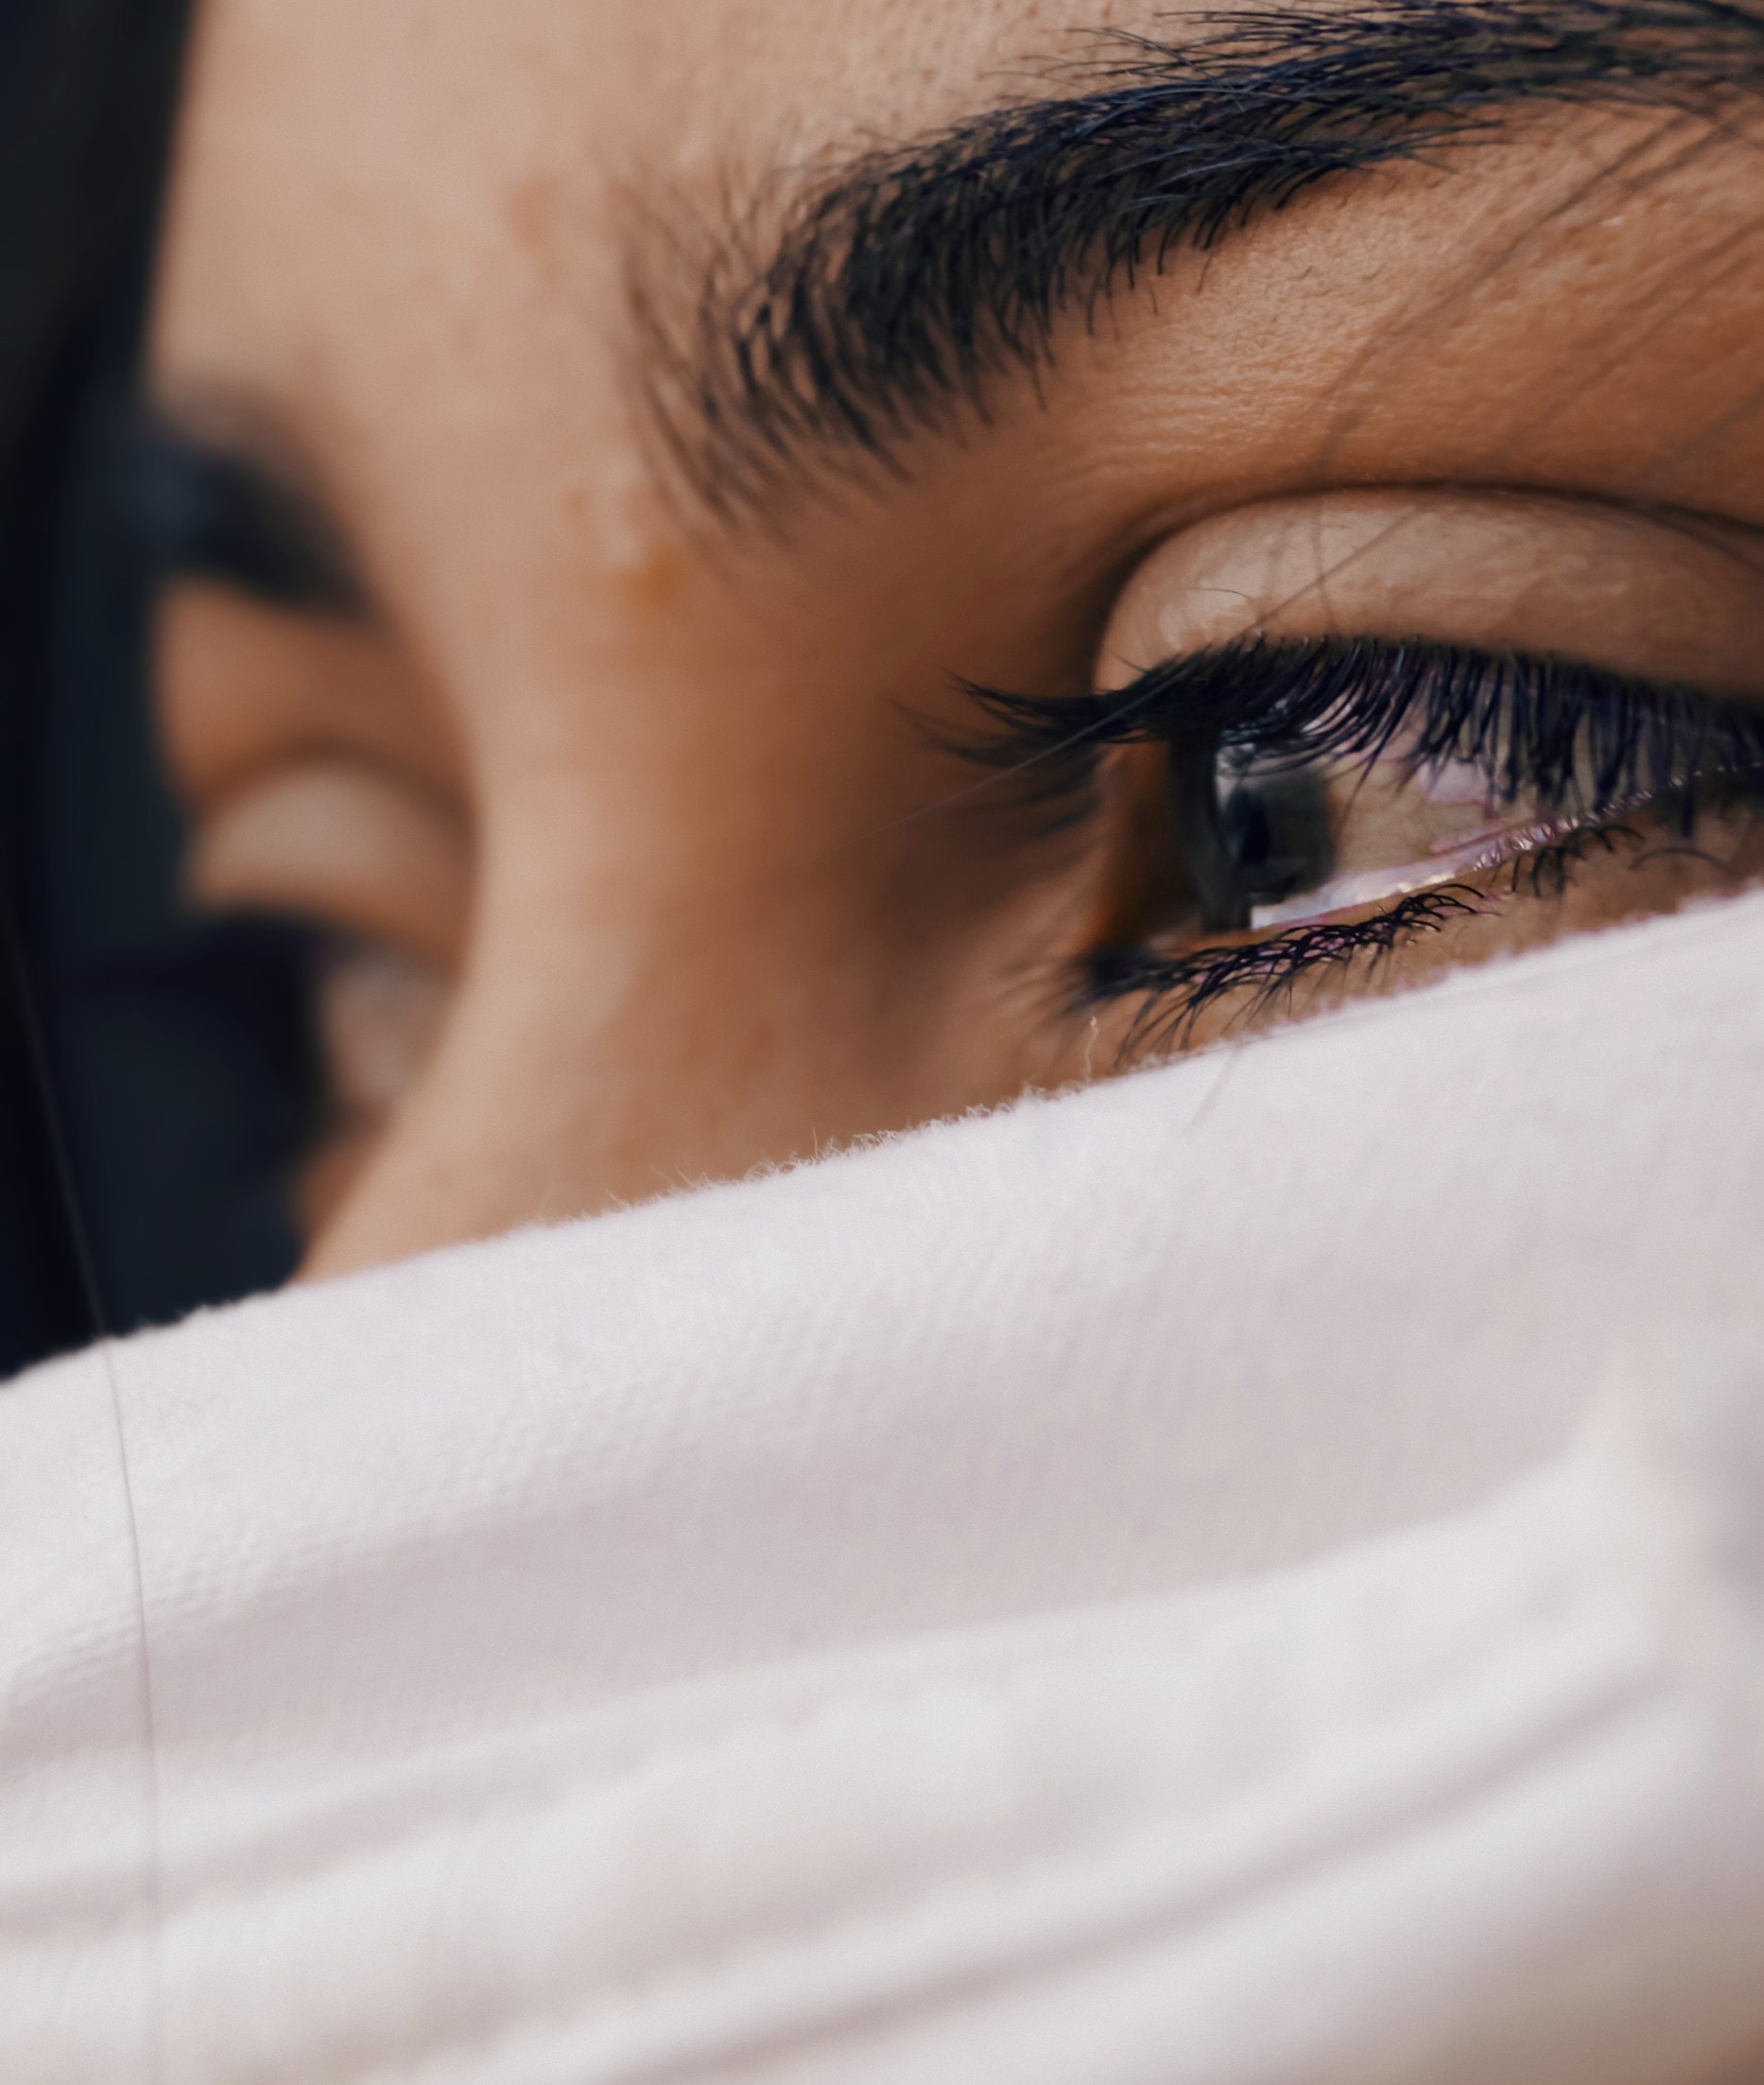 A photo of a woman crying │Source: Unsplash